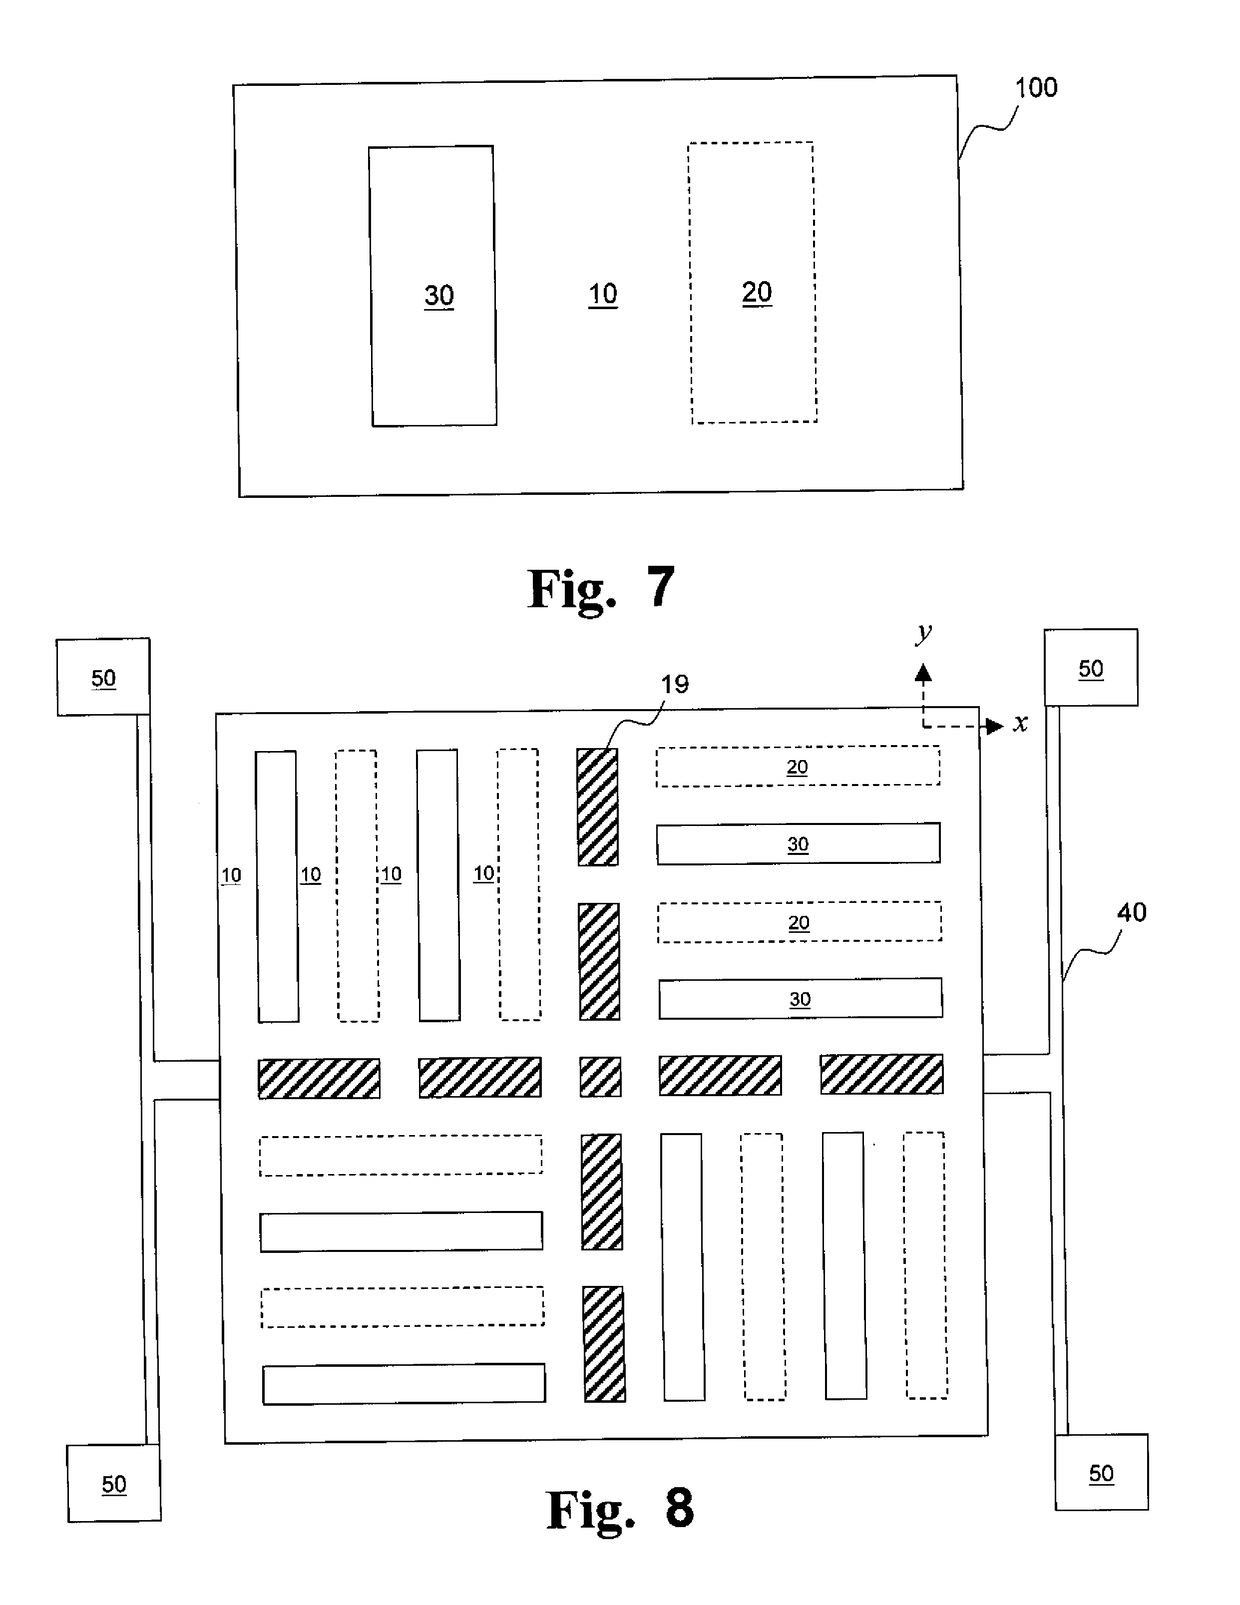 Micro-electro-mechanical system device